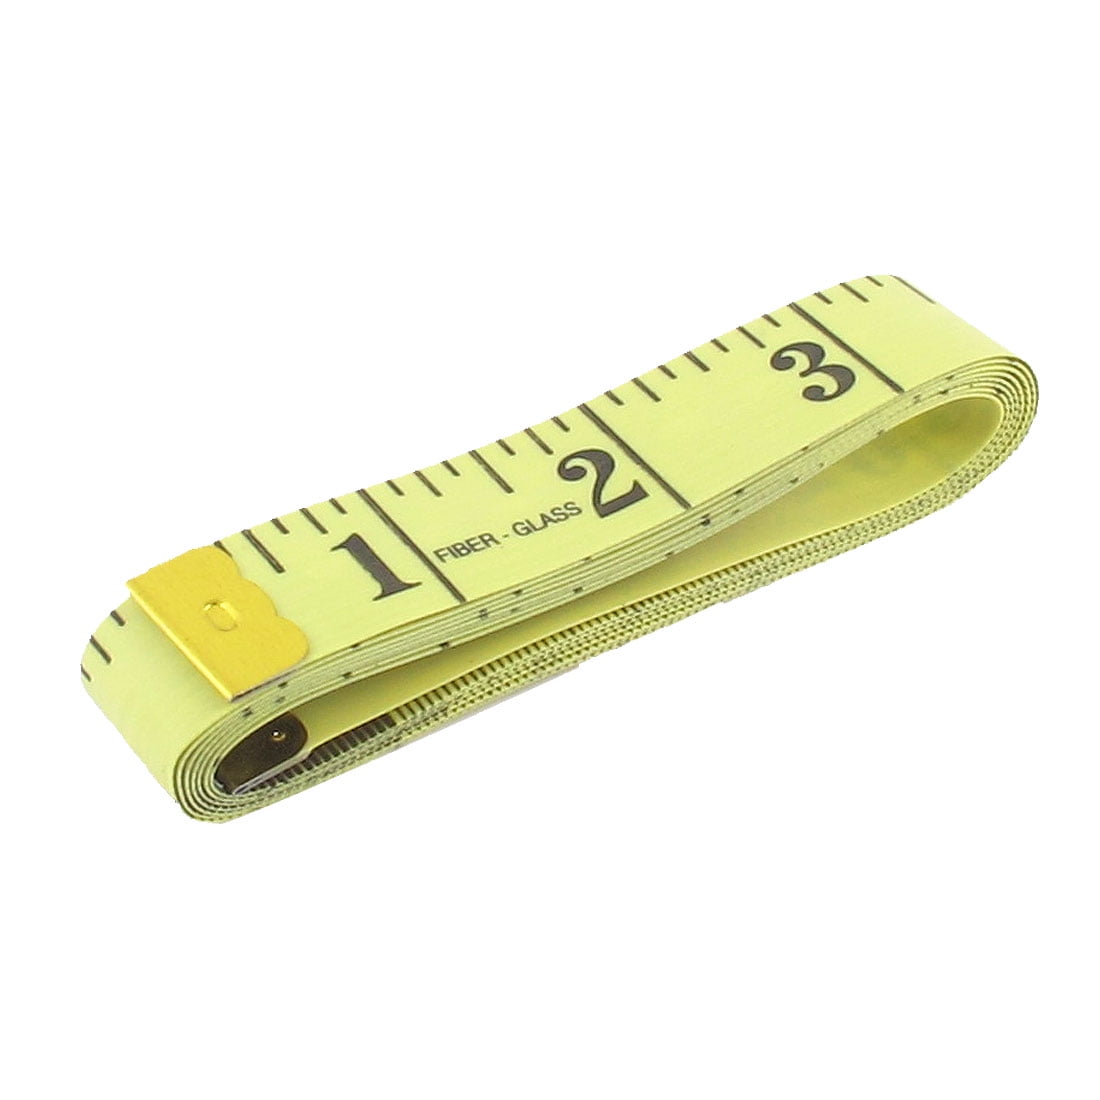 Unique Bargains Sewing Tailor Dieting Cloth Measure Tool Soft Flat Ruler Tape Yellow 1.5m 60